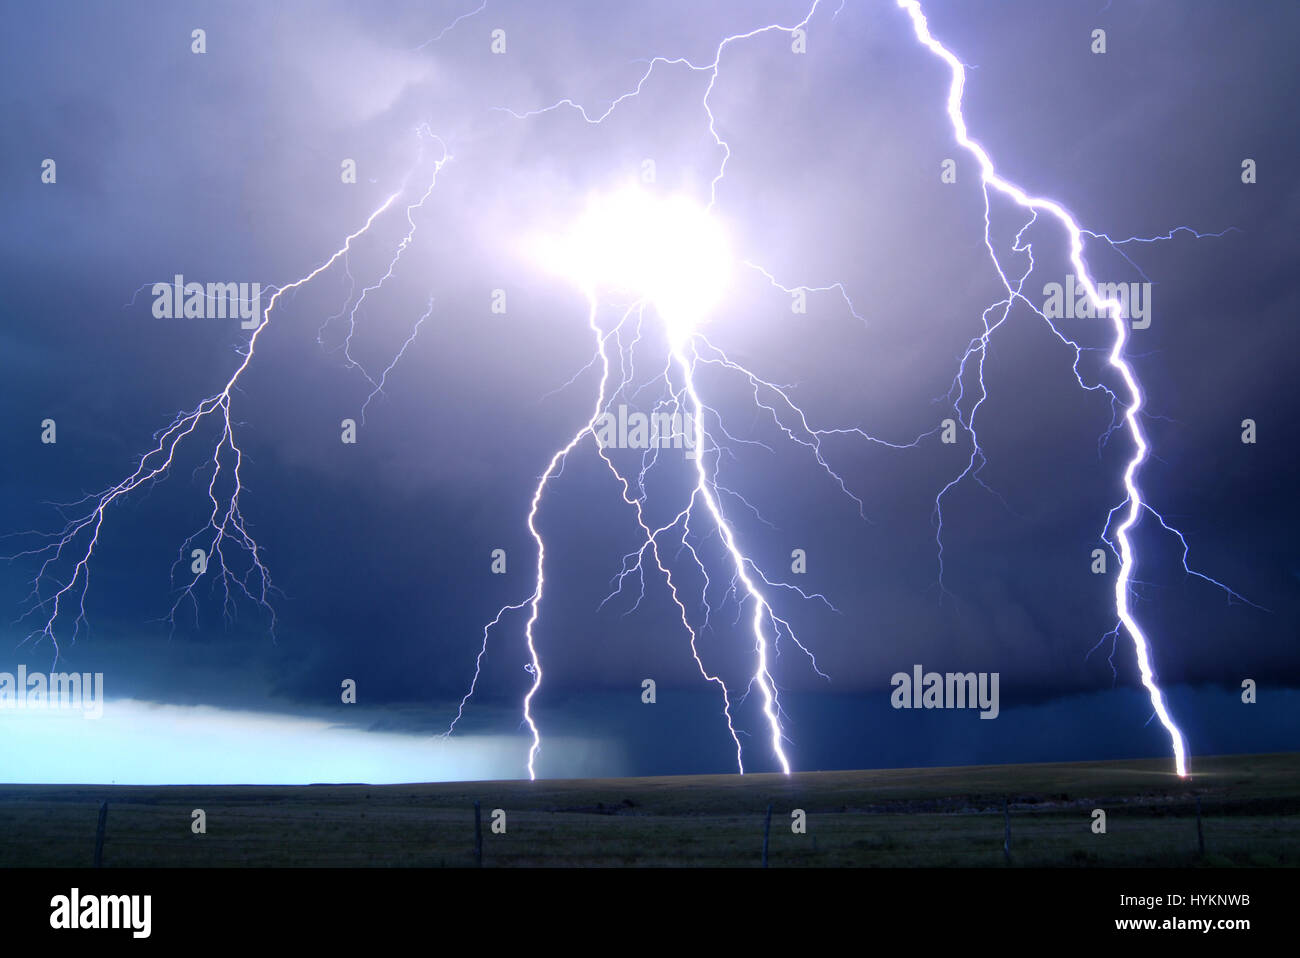 TORNADO ALLEY, USA: Texas, dual postive flash lighning. THE DEADLIEST weather events have been captured on camera by one lightning quick photographer. Incredible photographs show extreme weather from America’s Tornado Alley, renowned for the frequency of its storms. From terrifying lightning bolts to all-encompassing tornados, these pictures manage to capture to ferocity and atmosphere of these natural phenomena. Stock Photo